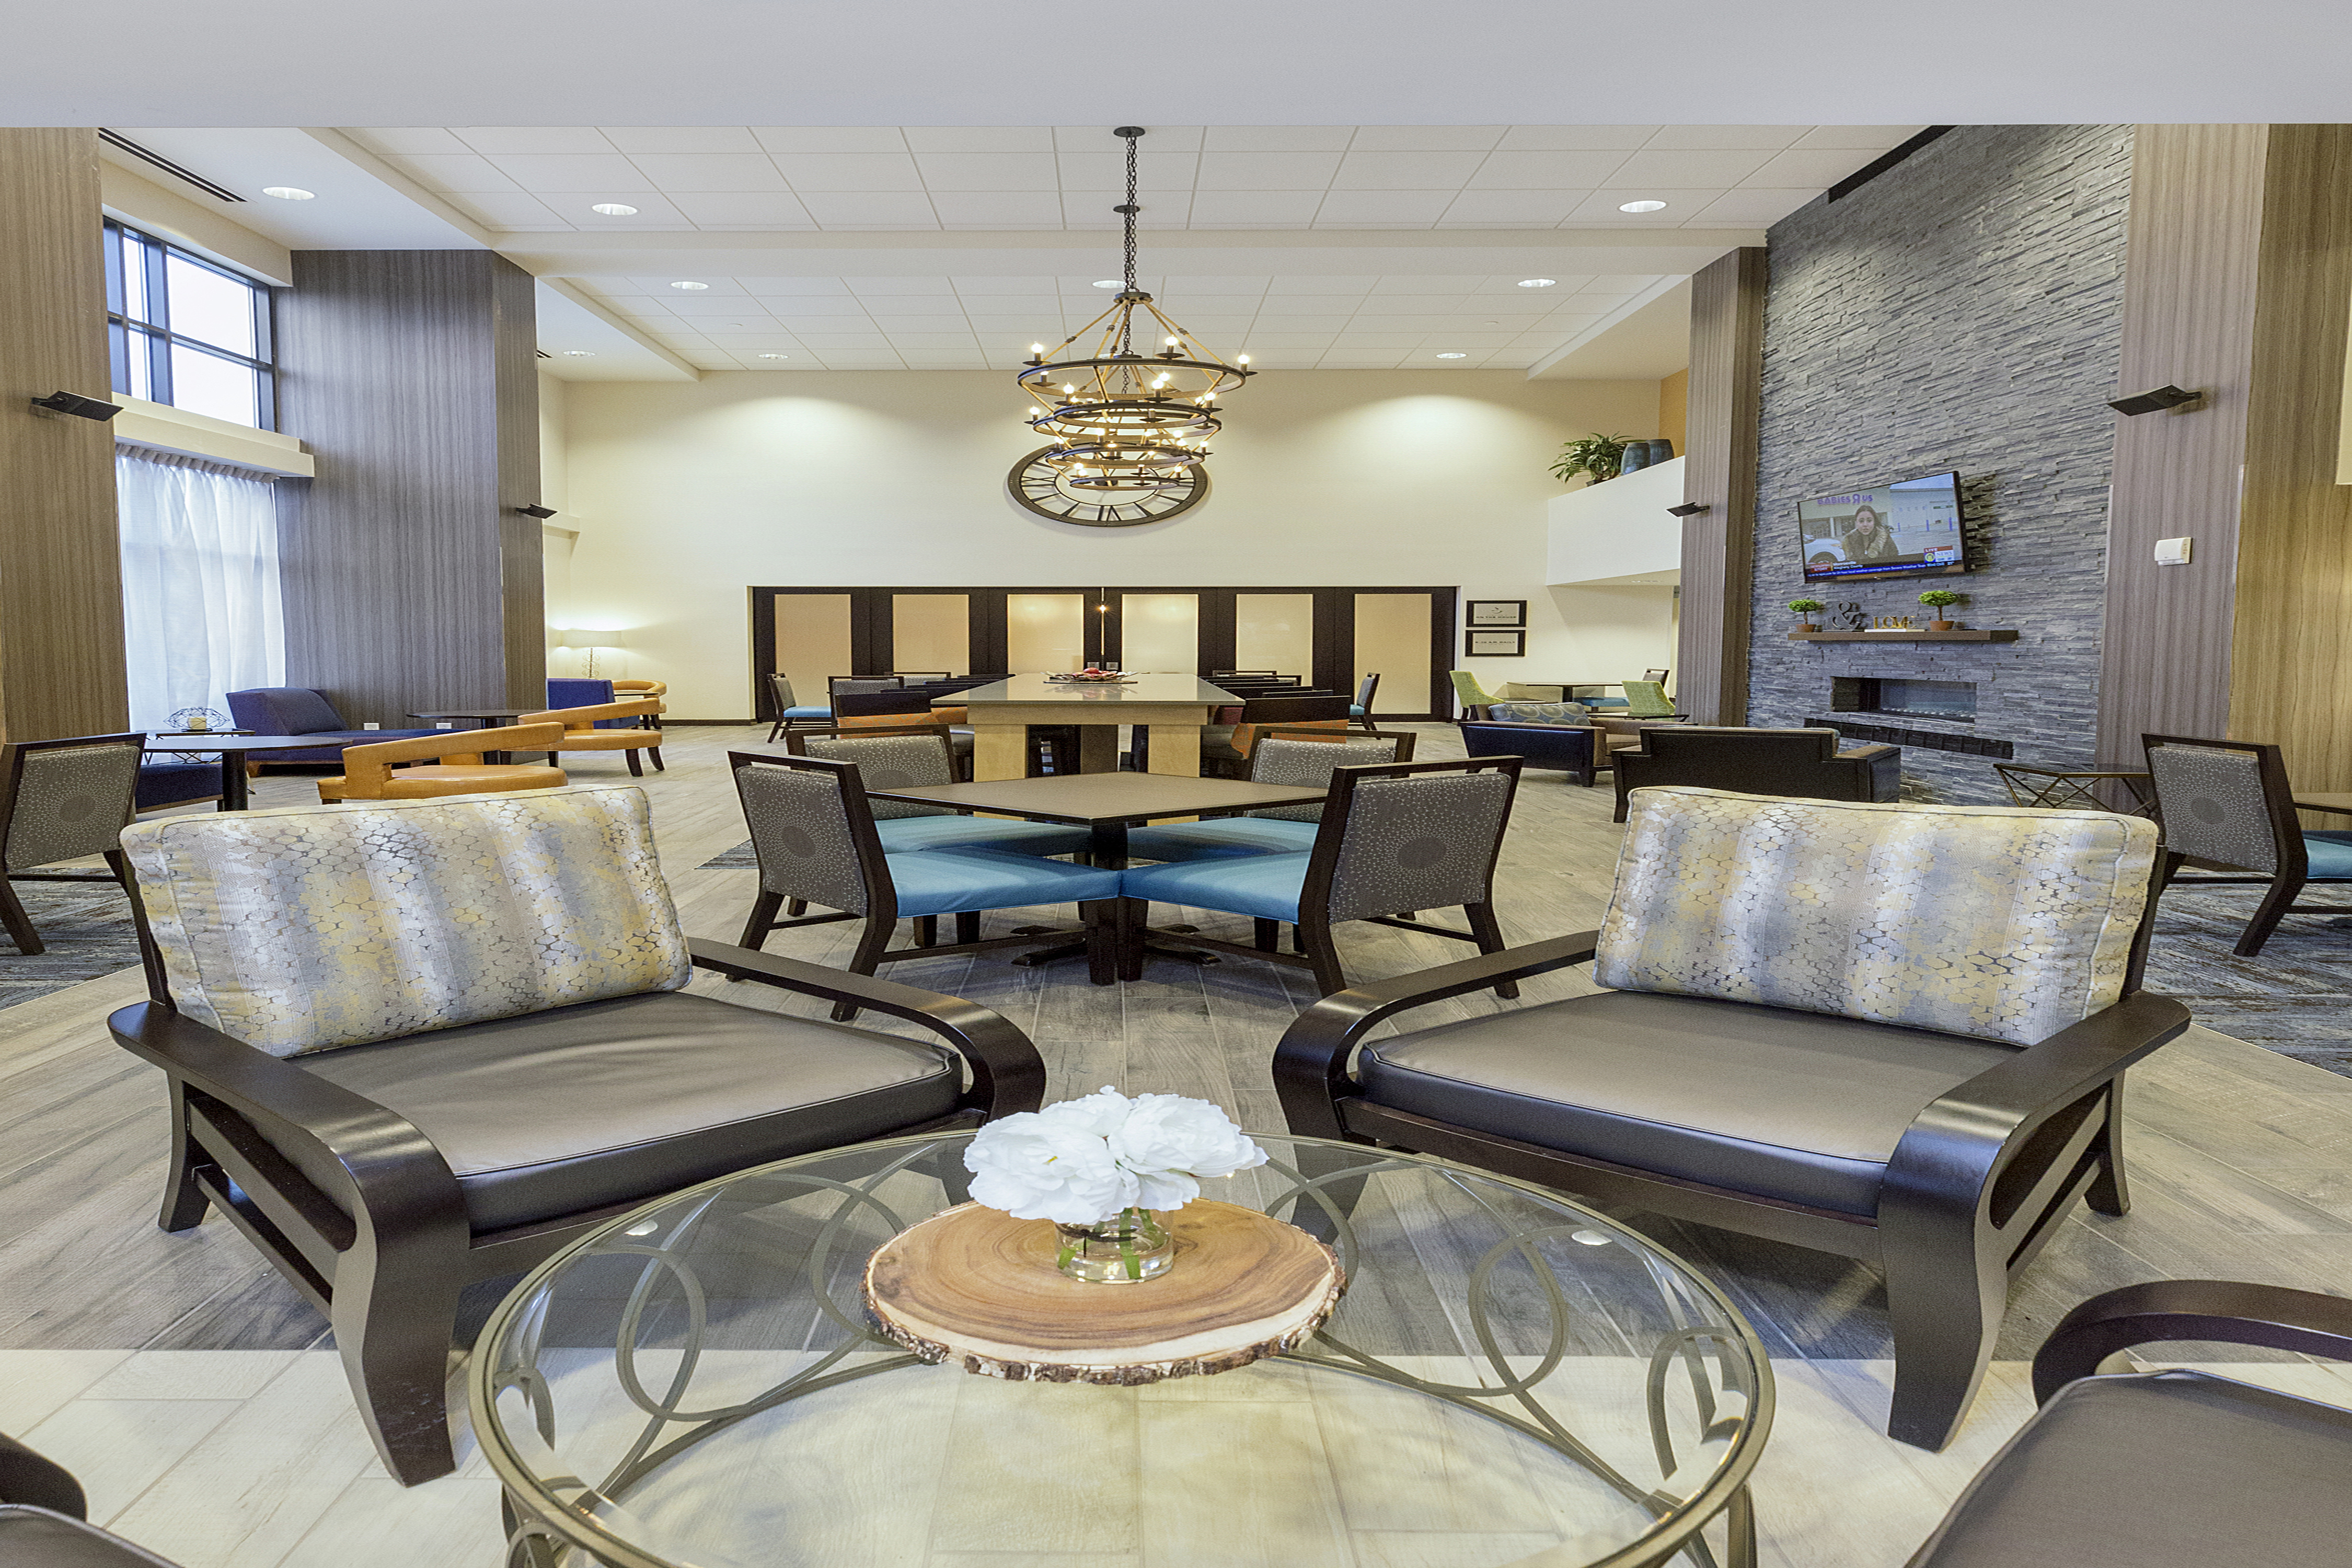 Lobby Seating Area with Chairs and Tables